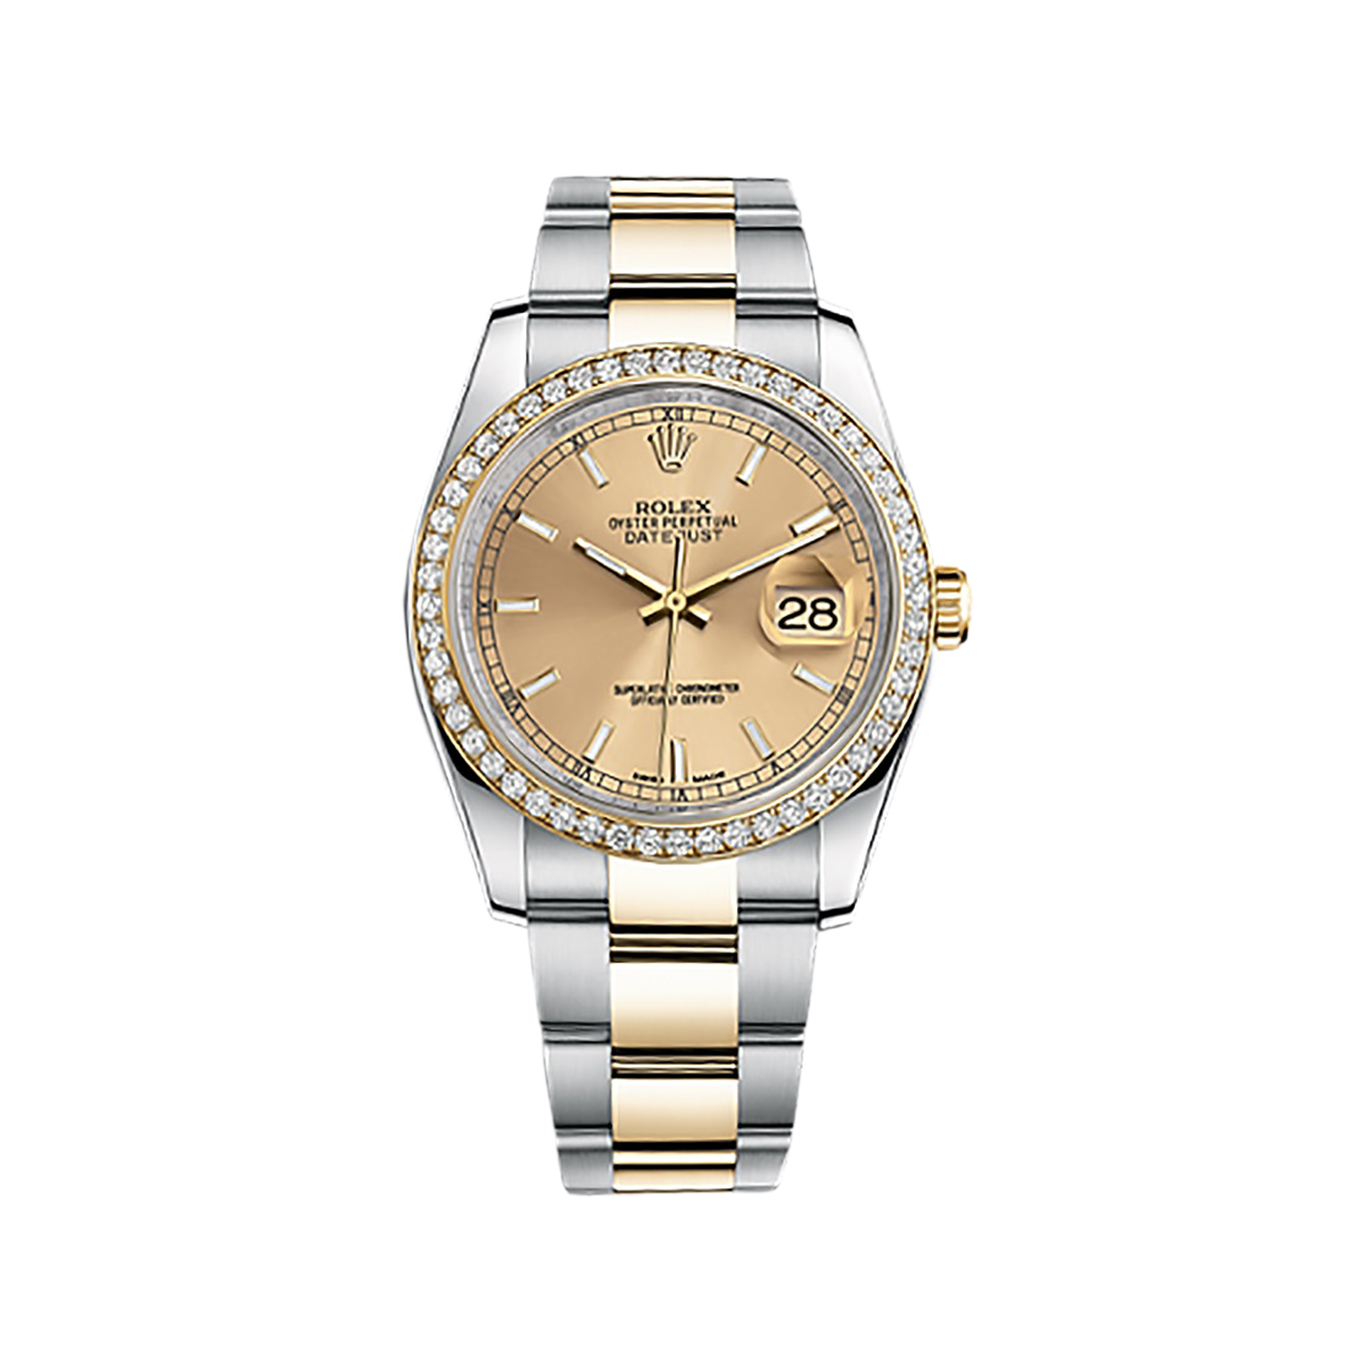 Datejust 36 116243 Gold & Stainless Steel Watch (Champagne)